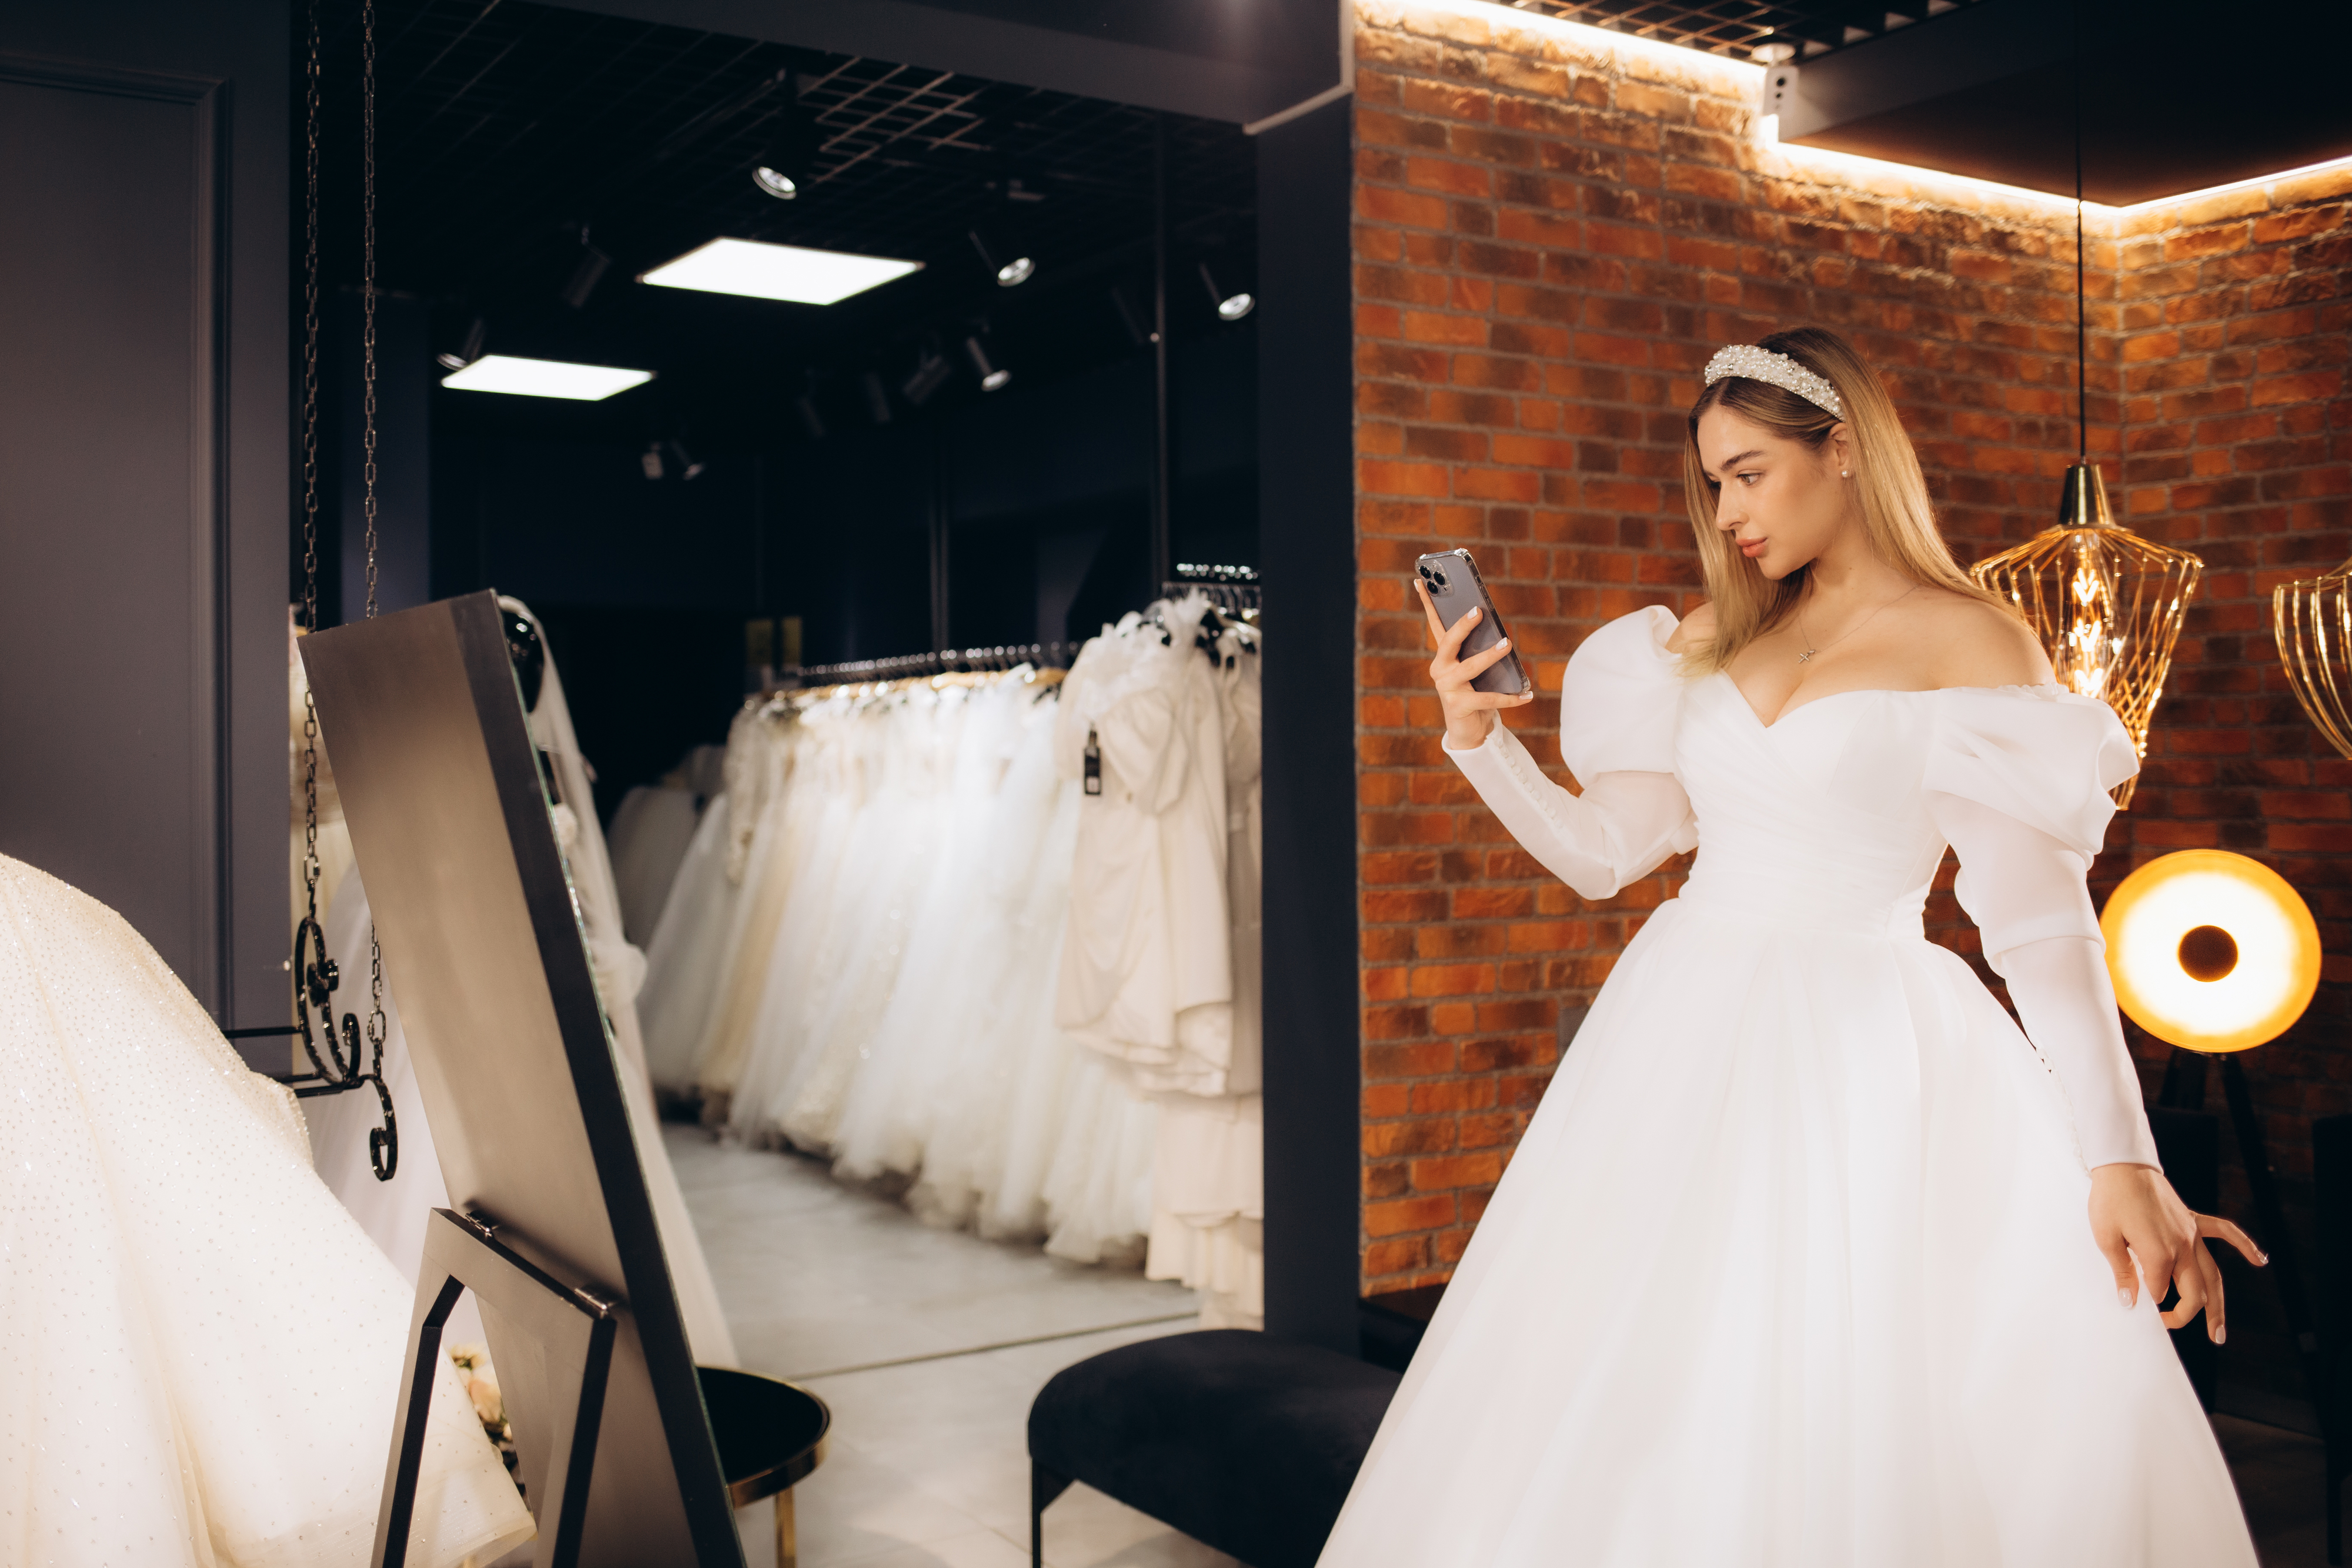 A woman in an off-the-shoulder wedding dress takes a selfie in a bridal boutique